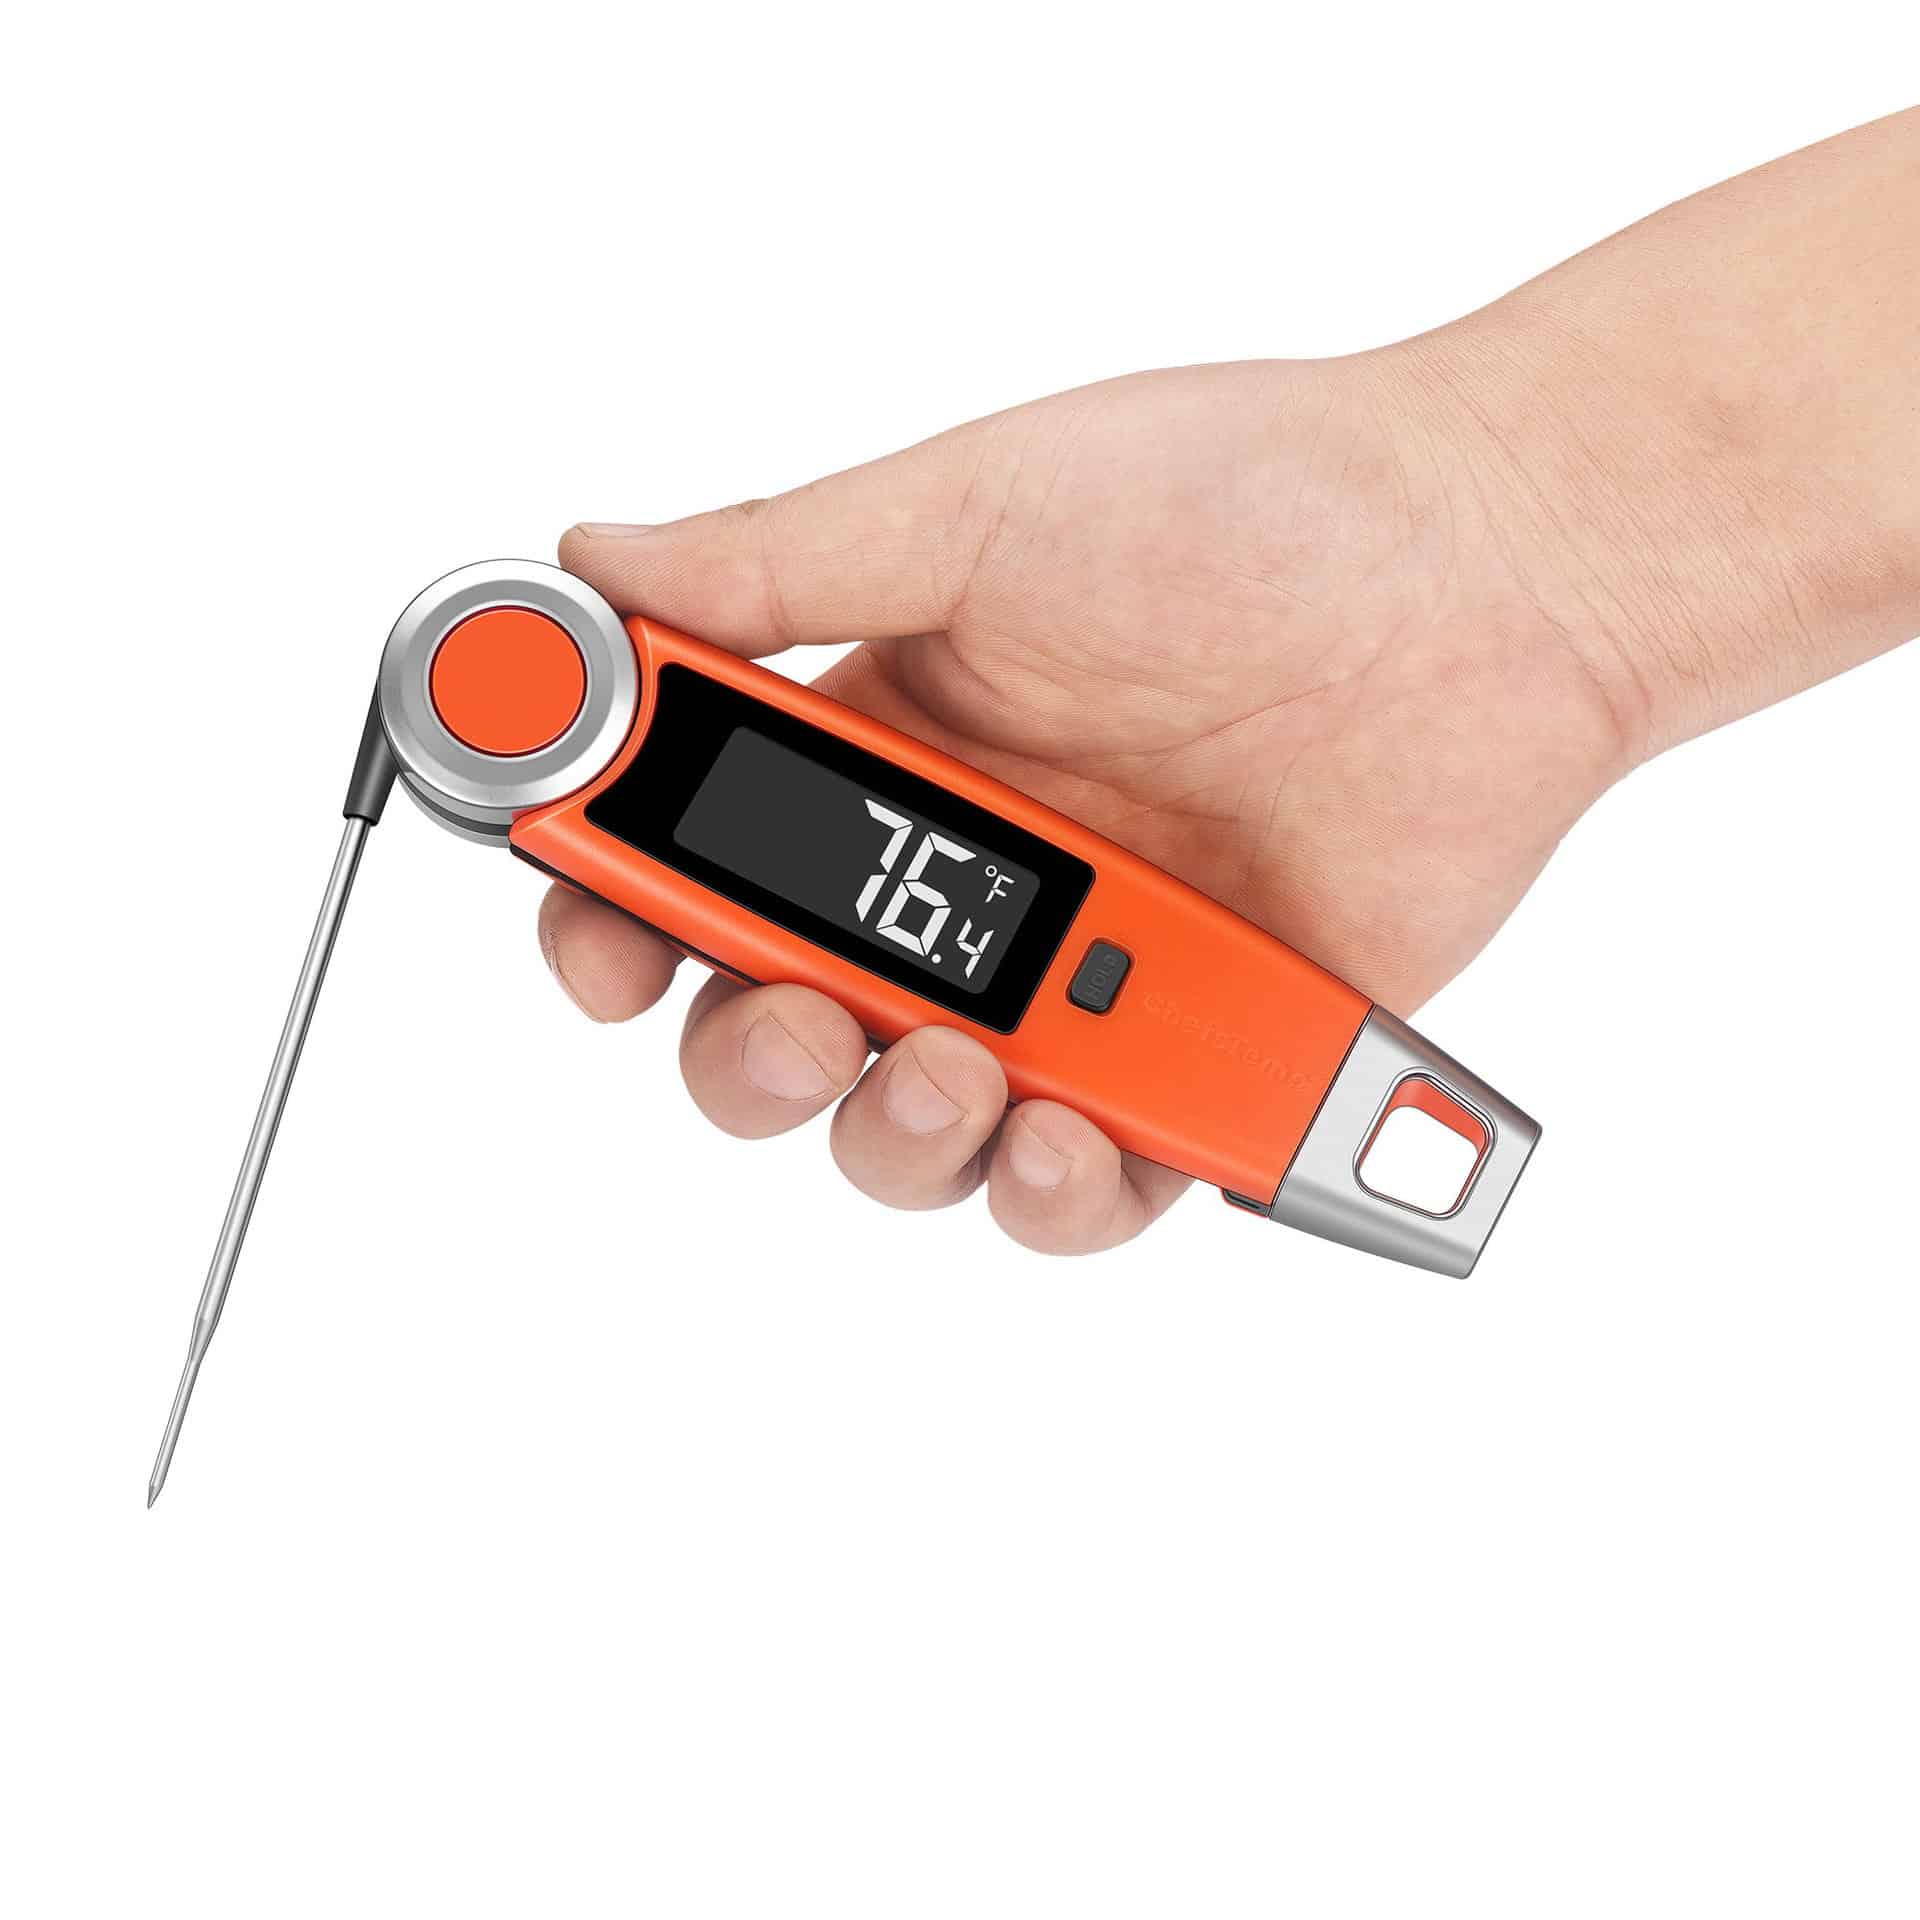 Best Instant Read Meat Thermometer 2022: The ChefsTemp Finaltouch X10